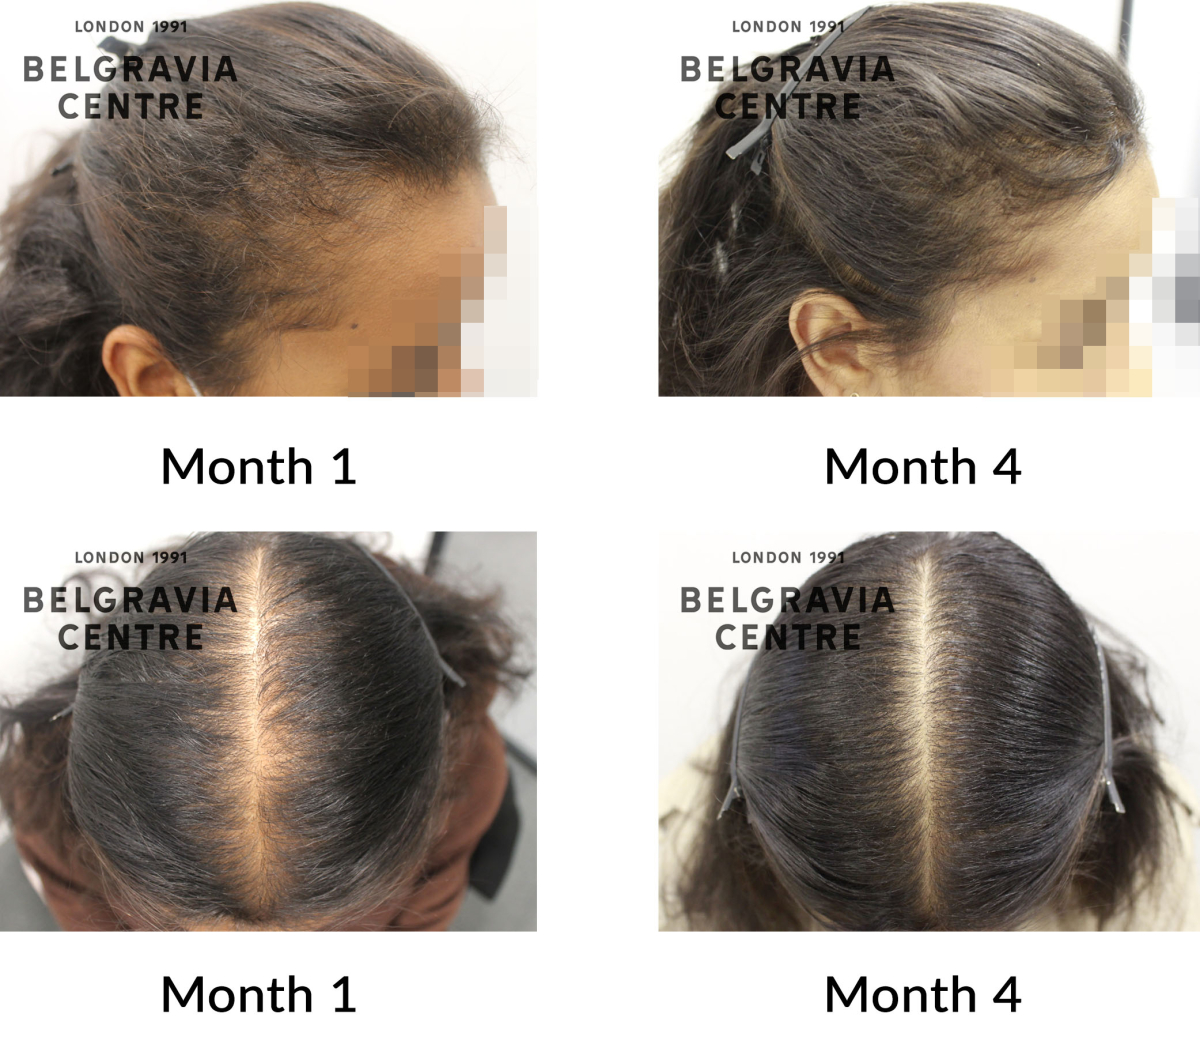 female pattern hair loss and diffuse thinning the belgravia centre 433357